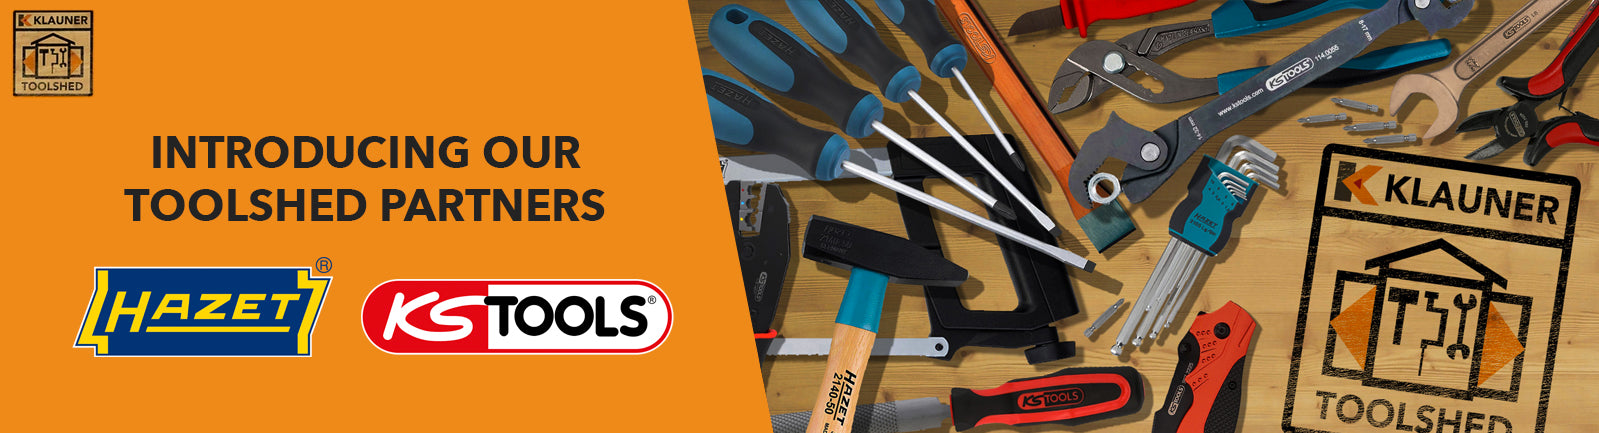 Hazet and KSTools are our Toolshed partners